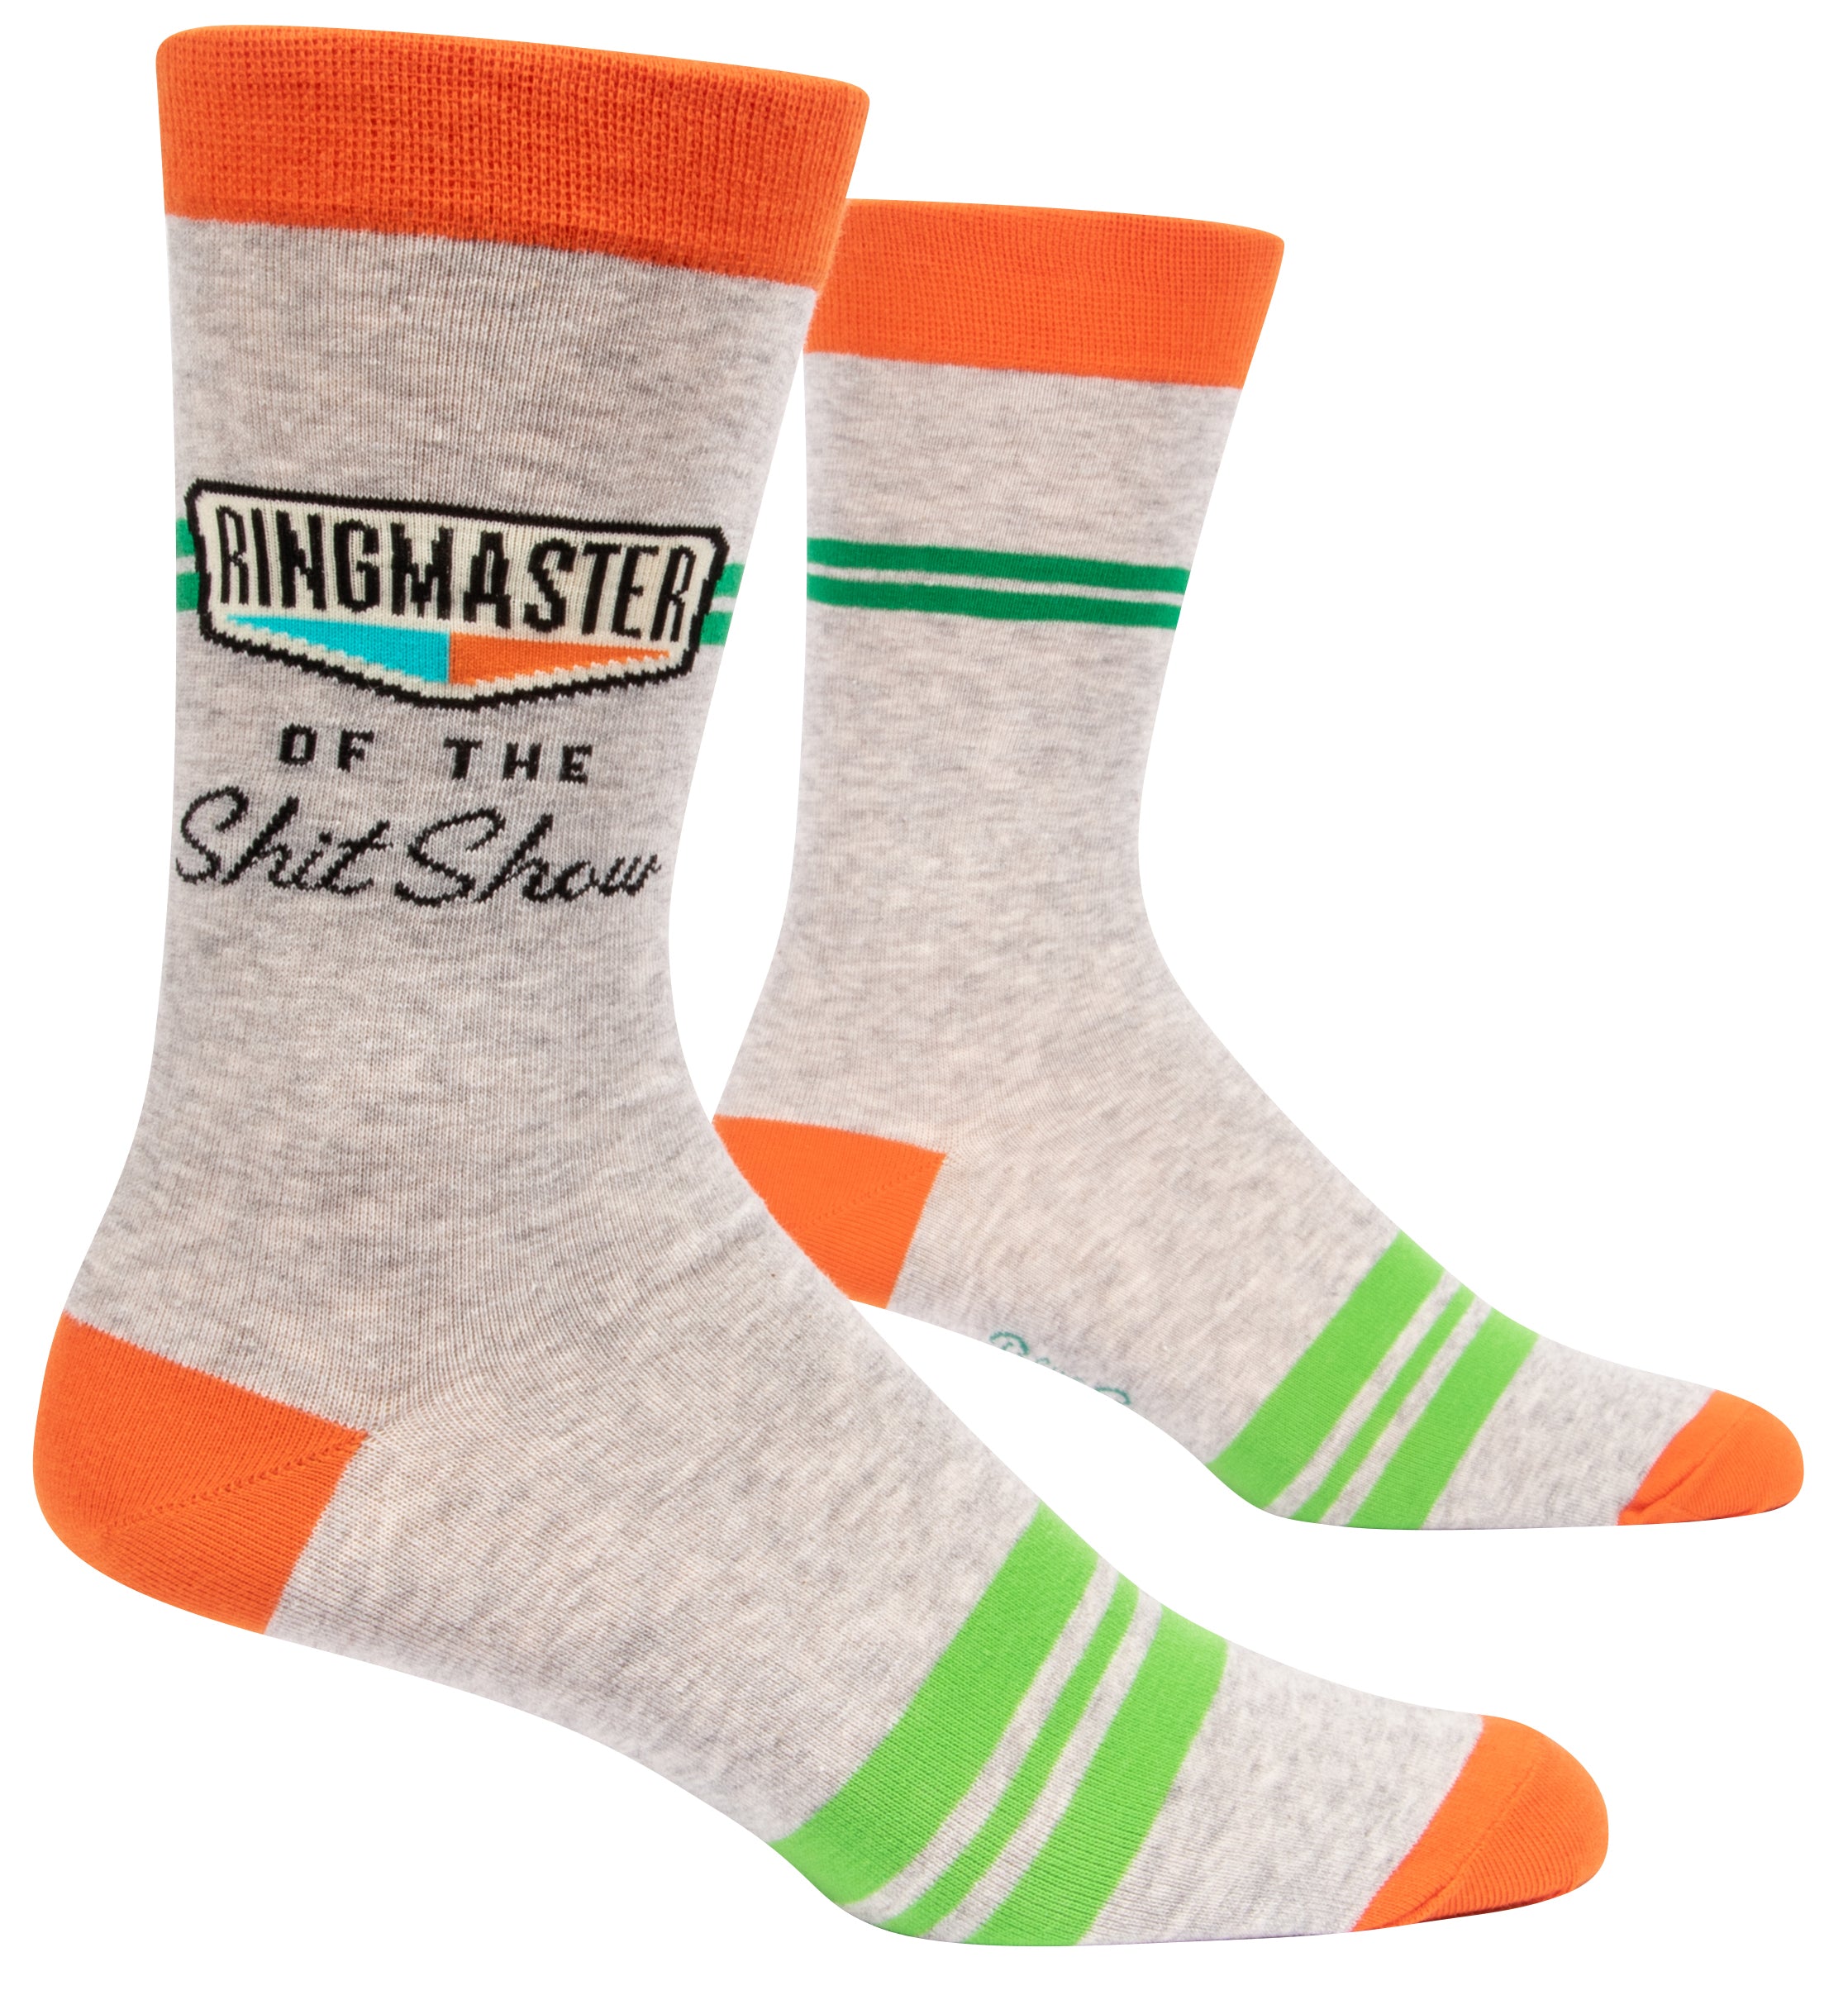 grey socks with orange tips and green rings on ankle it says ringmaster of the shitshow